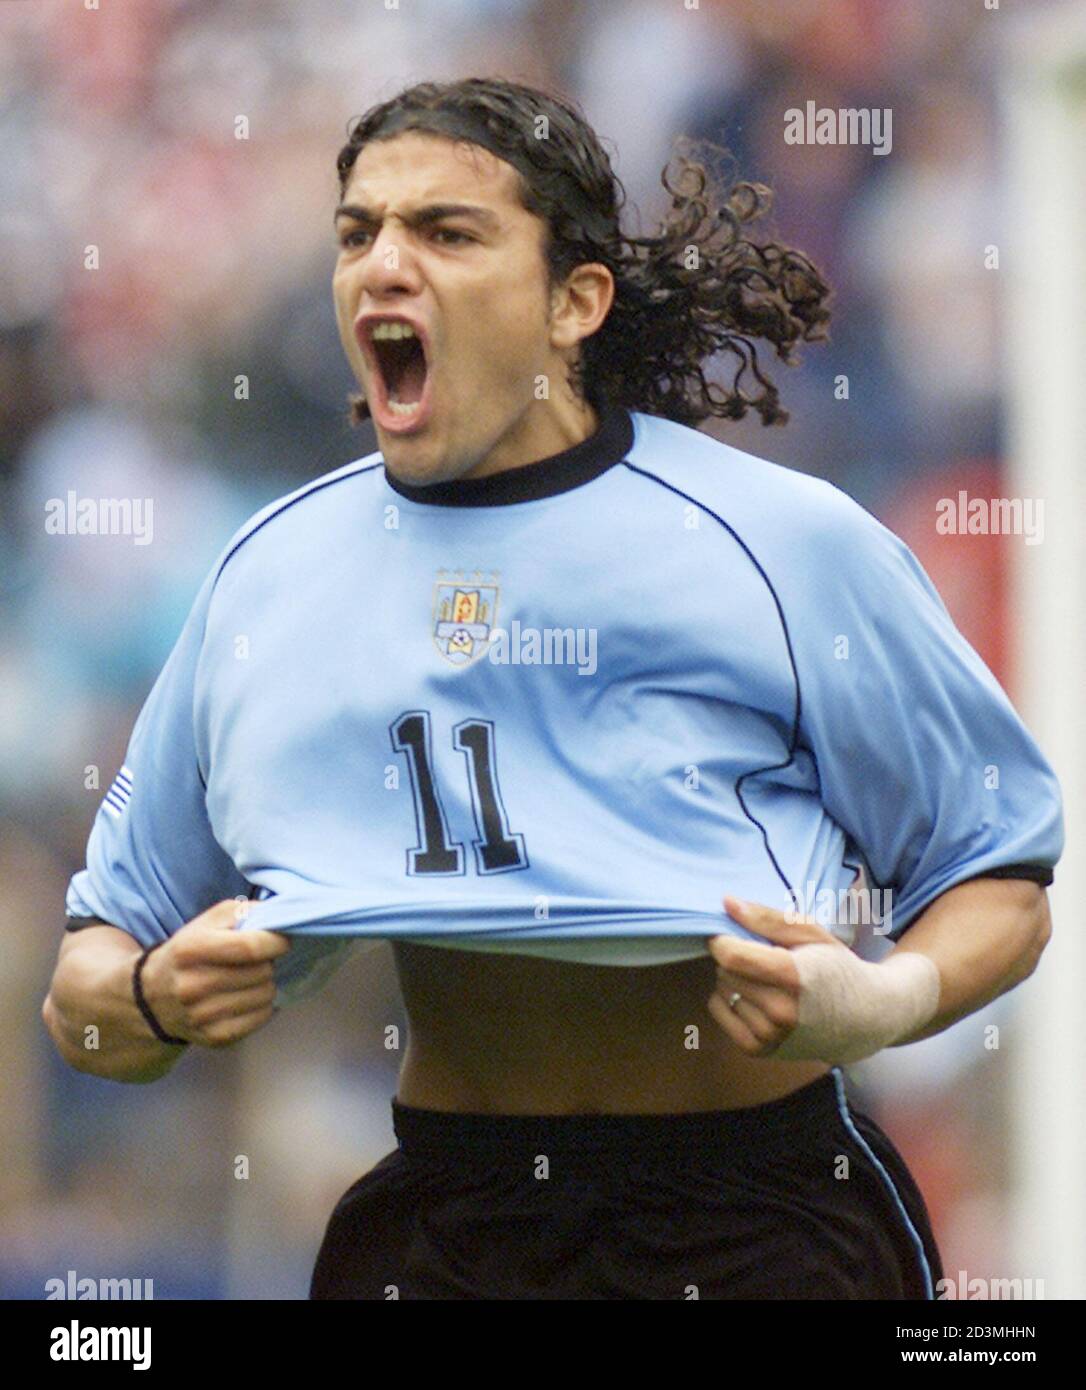 Federico Magallanes of Uruguay celebrates after scoring his team's first  goal against Colombia in the first half of their World Cup qualifying match  played at Centenario stadium in Montevideo, October 7, 2001.